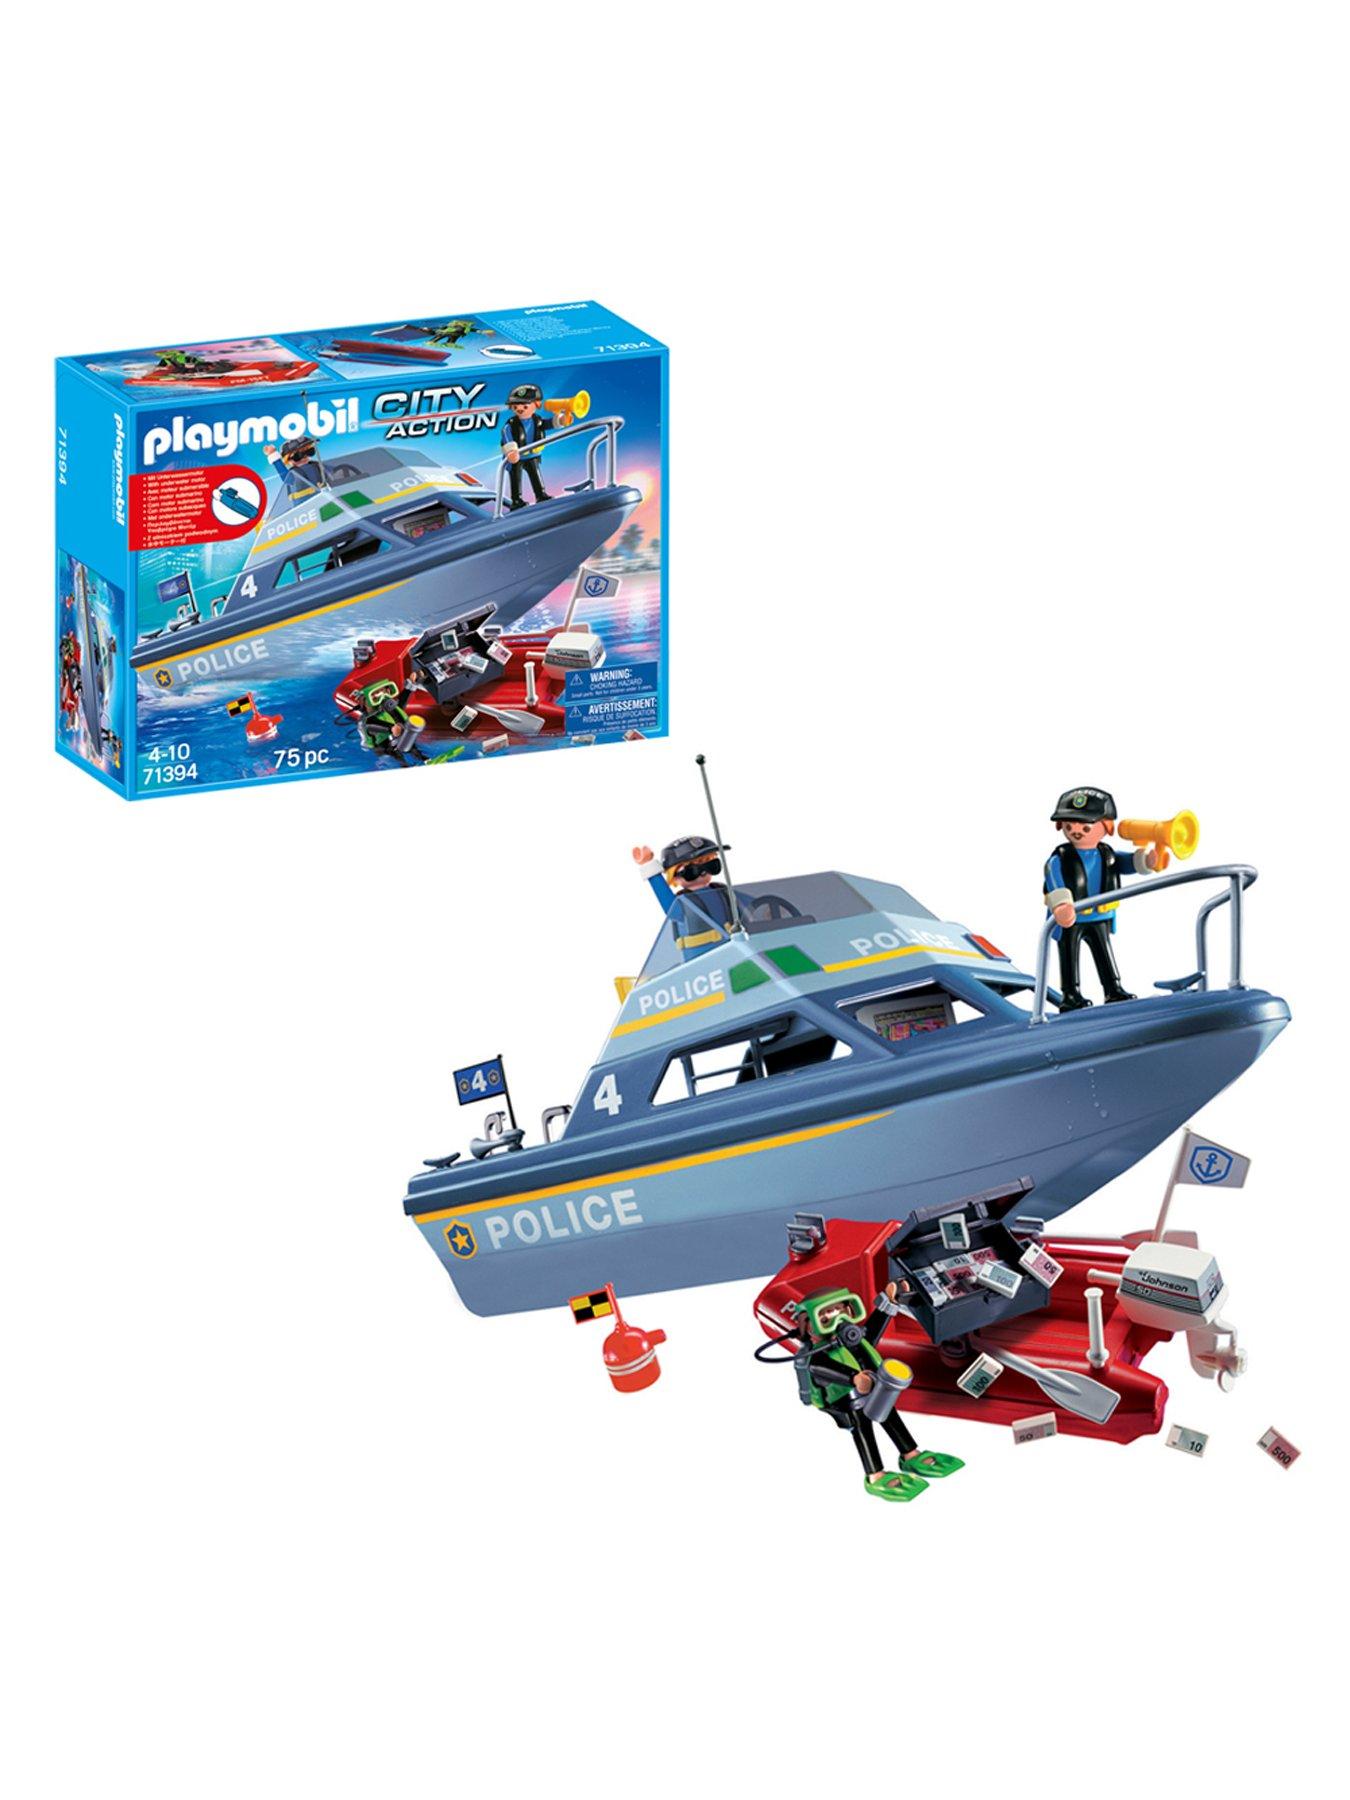 Playmobil 1-2-3 - Briefcase Boat